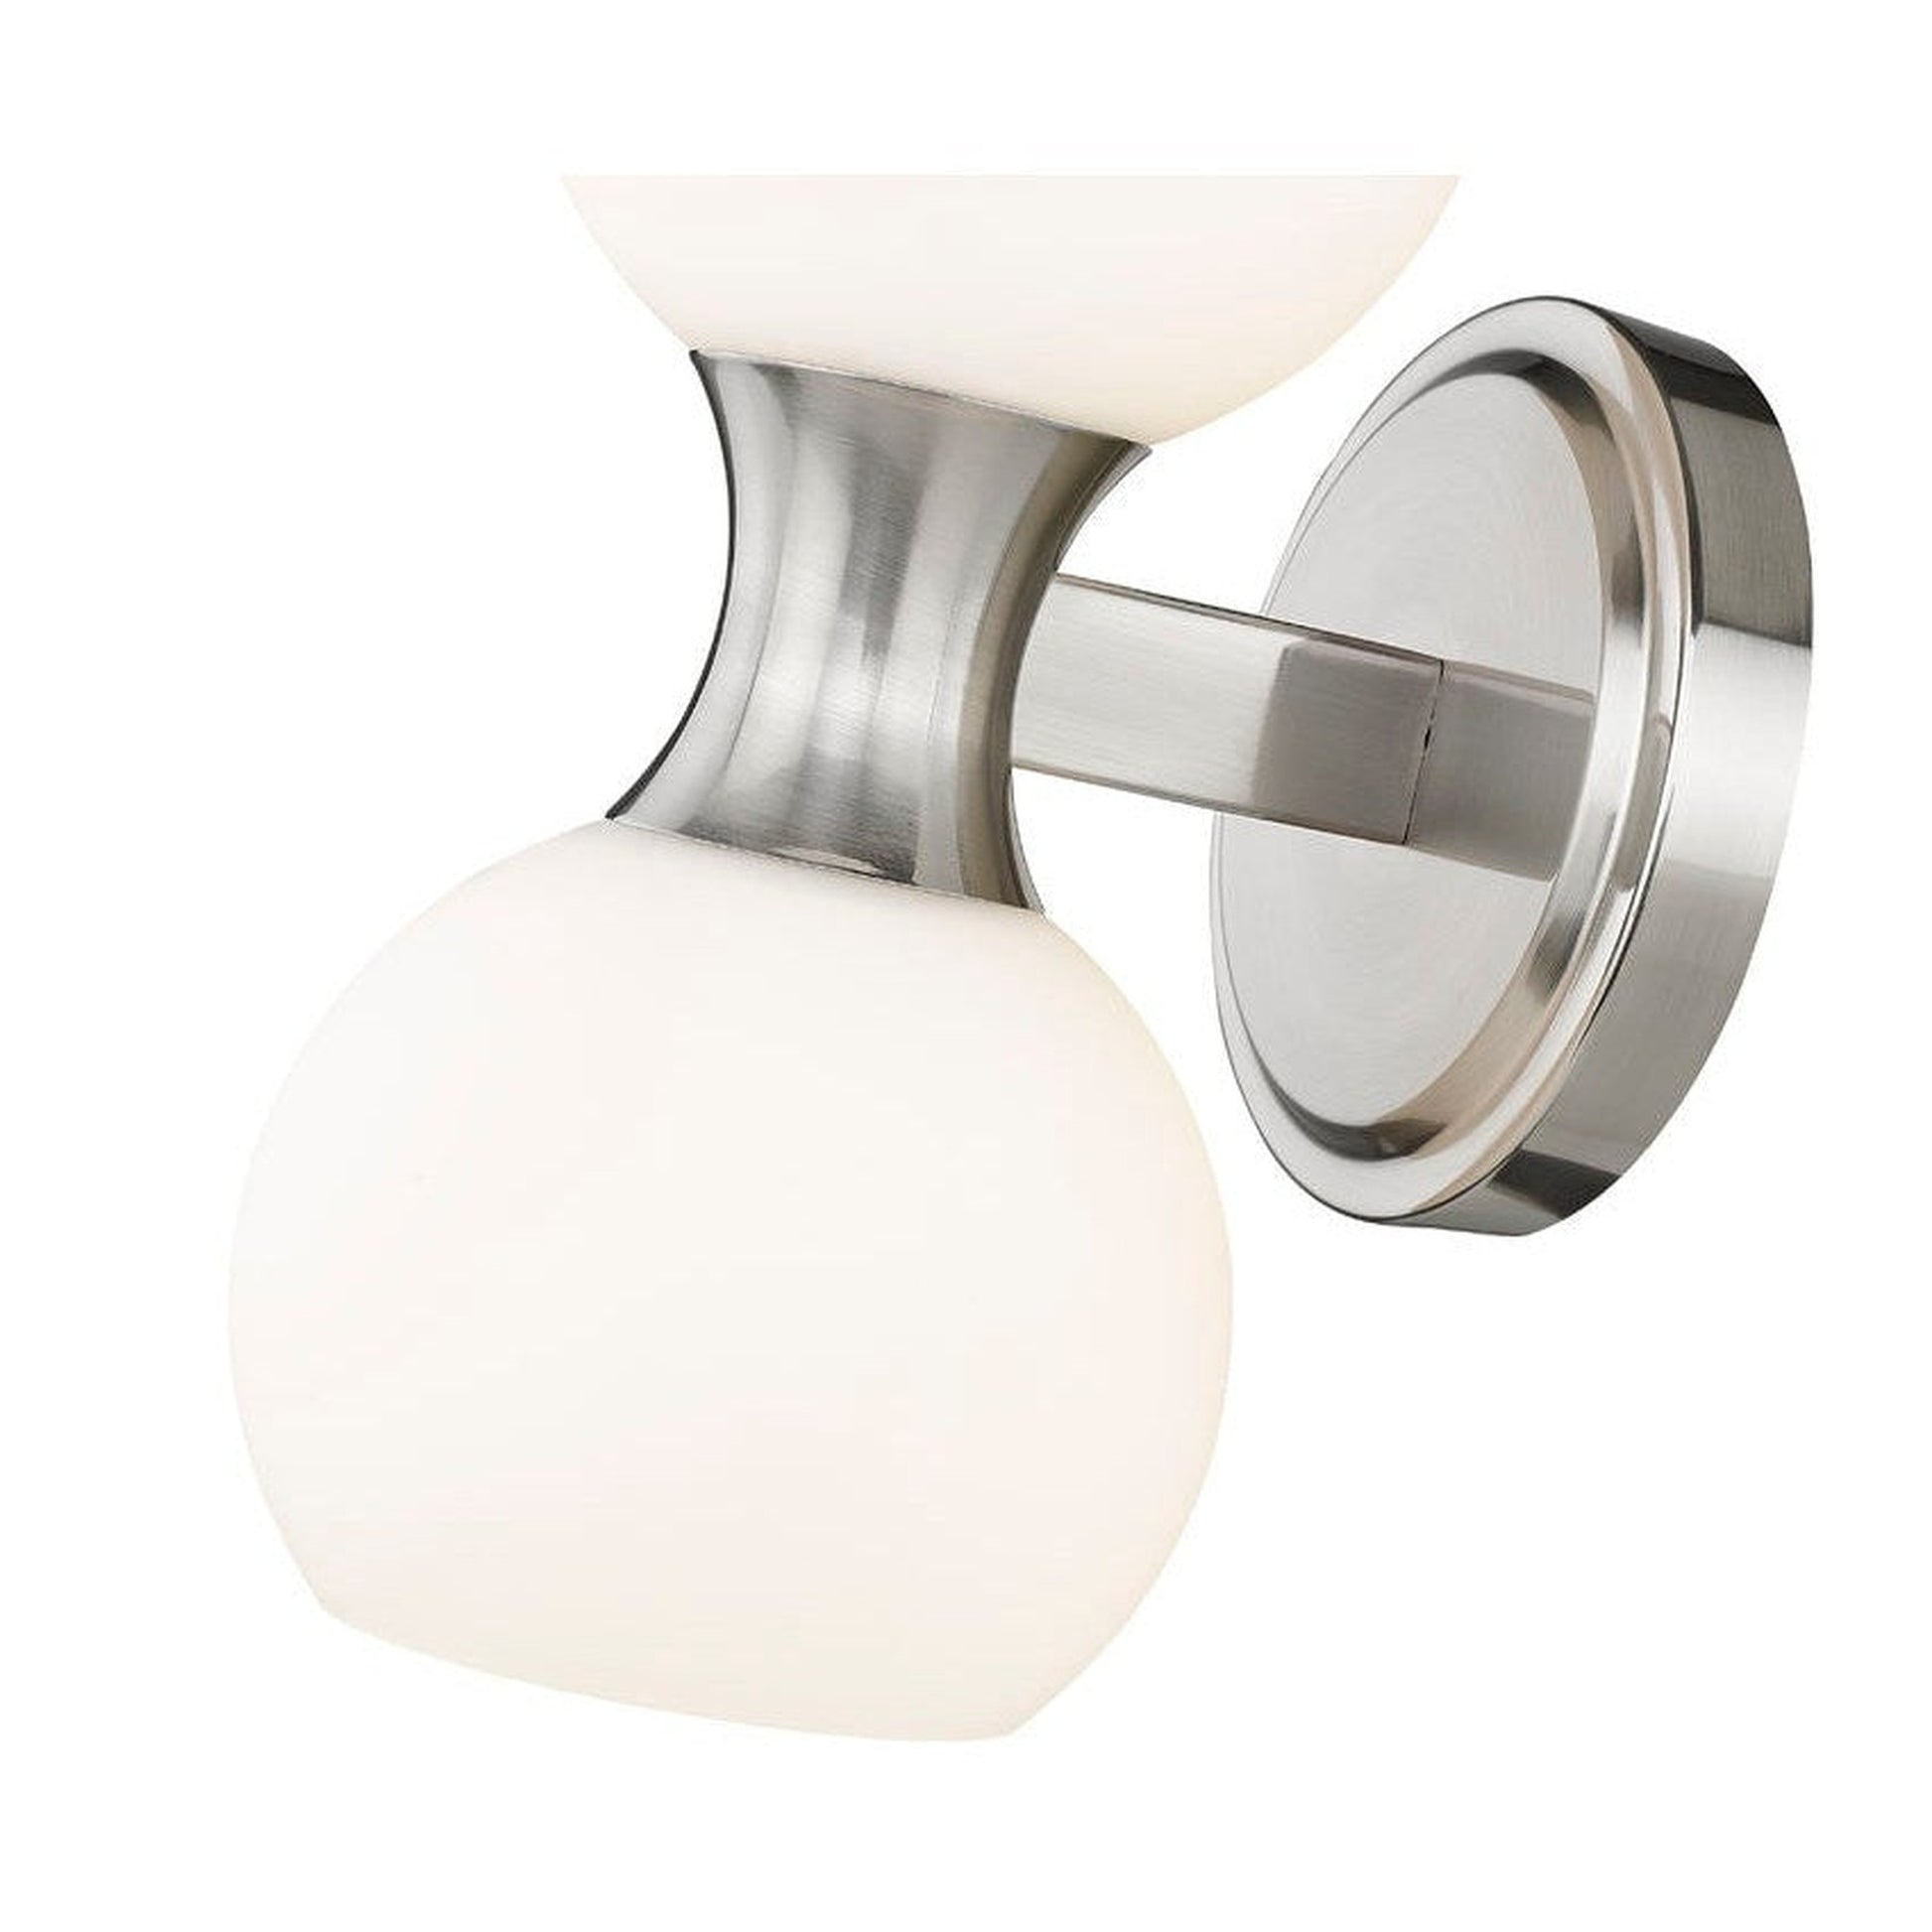 Z-Lite Artemis 5" 2-Light Brushed Nickel and Matte Opal Glass Shade Wall Sconce